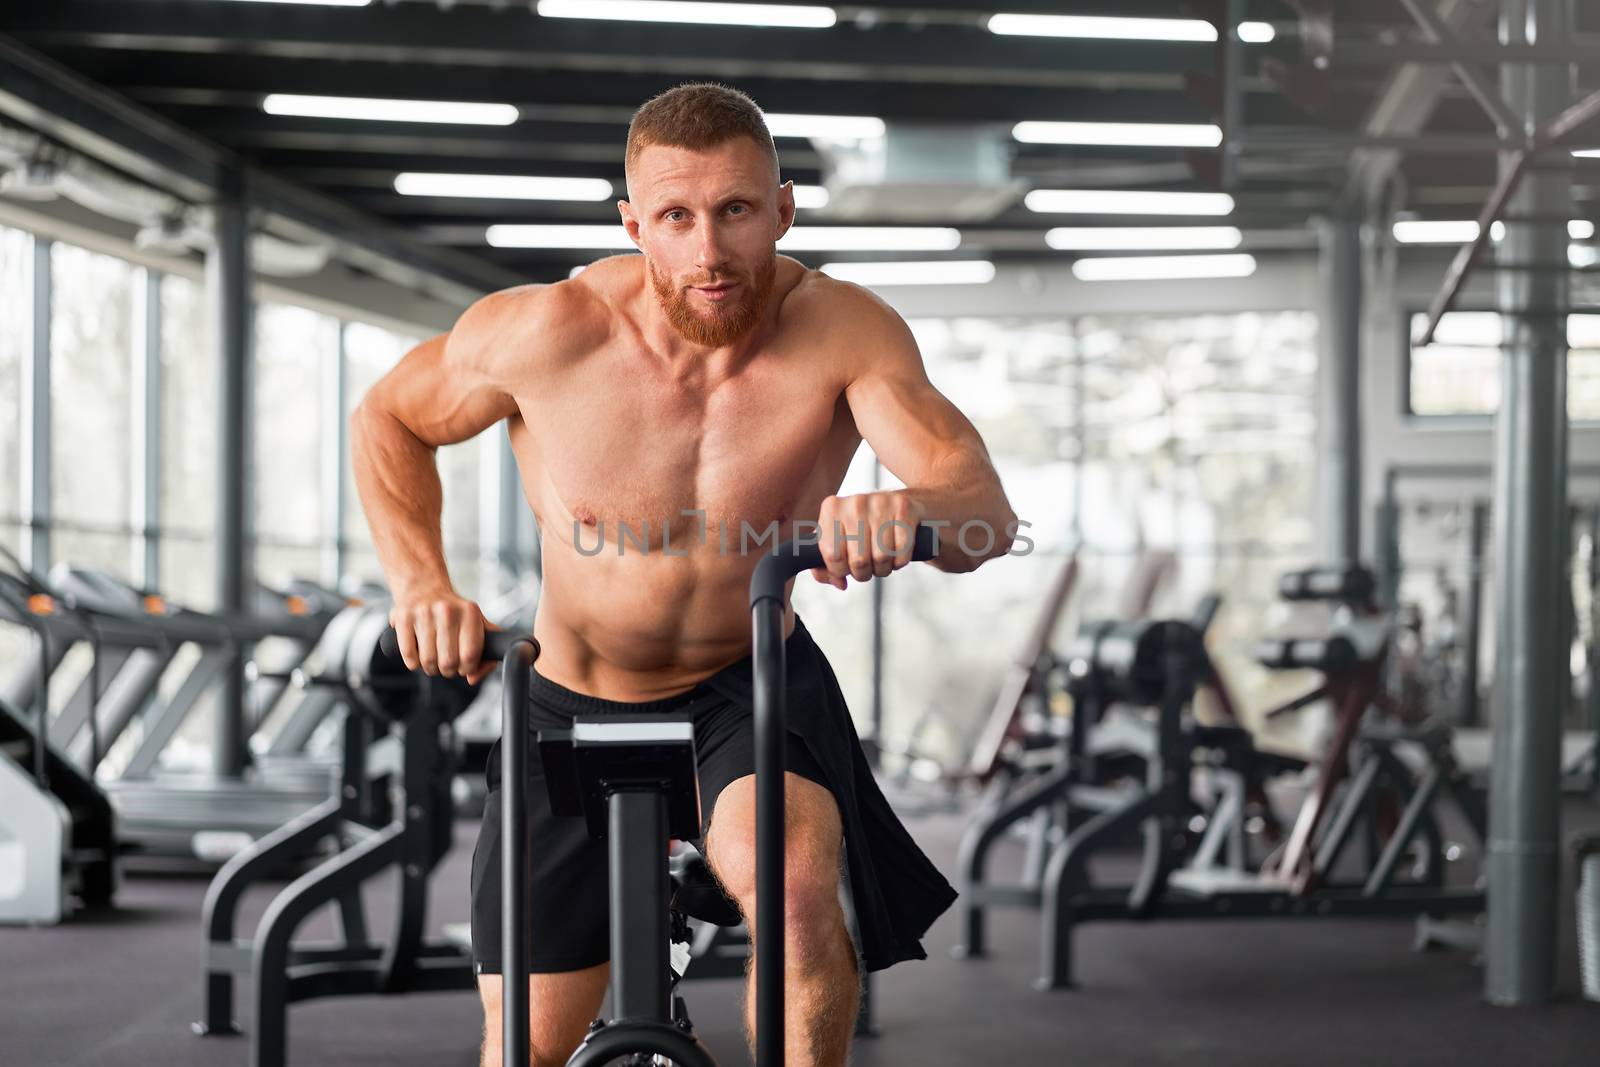 Man exercise bike gym cycling training fitness. Fitness male using air bike cardio workout. Athlete guy naked torso biking indoor gym exercising his legs. Cross functional training.